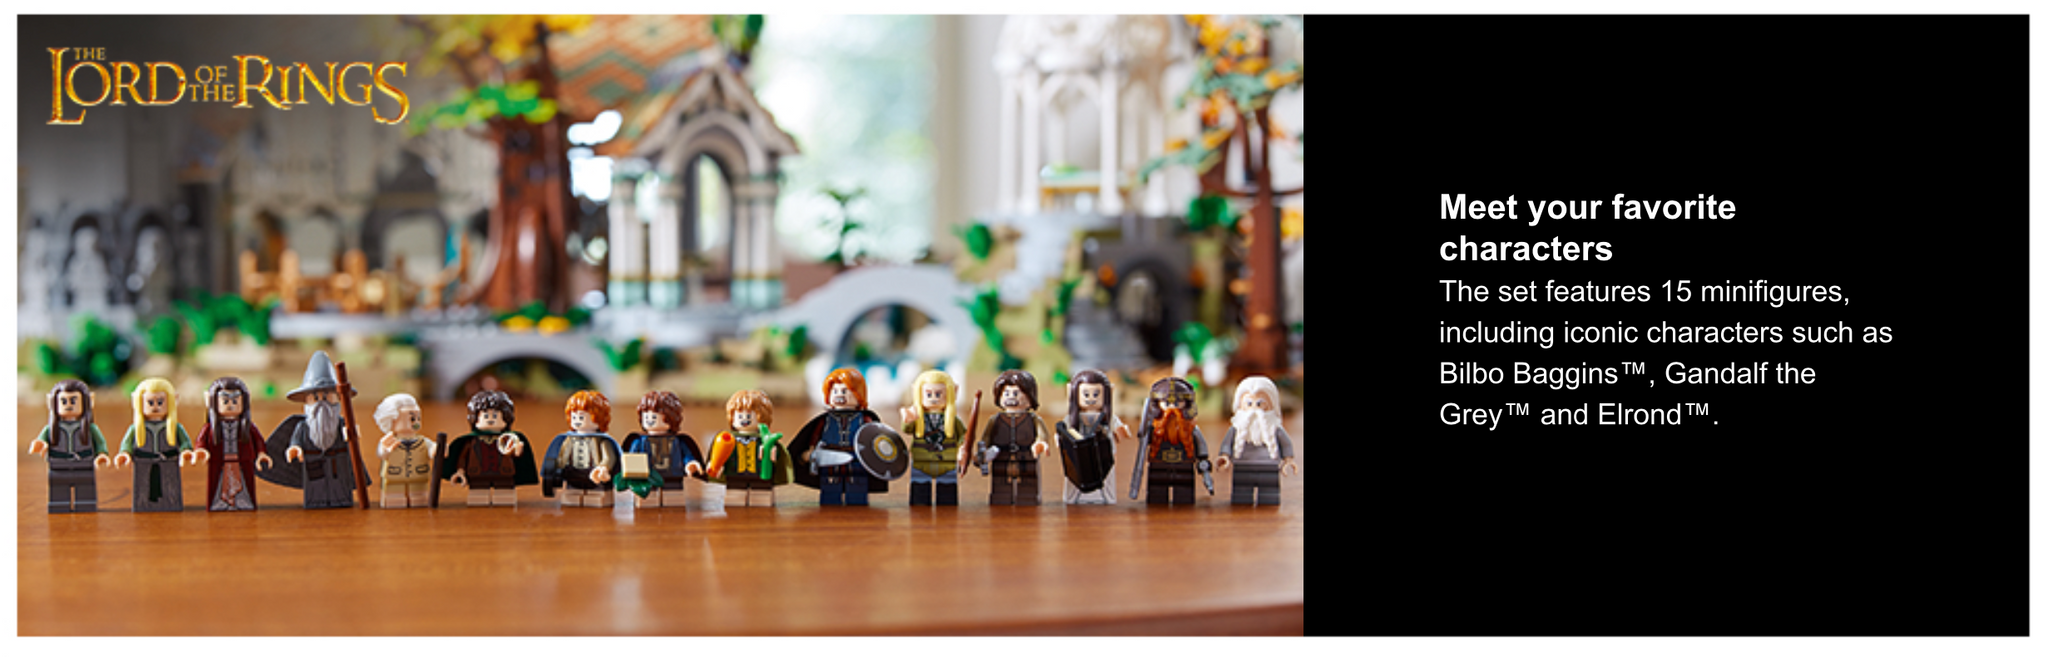 LEGO Unveils Epic Lord Of The Rings Rivendell Set, Movies